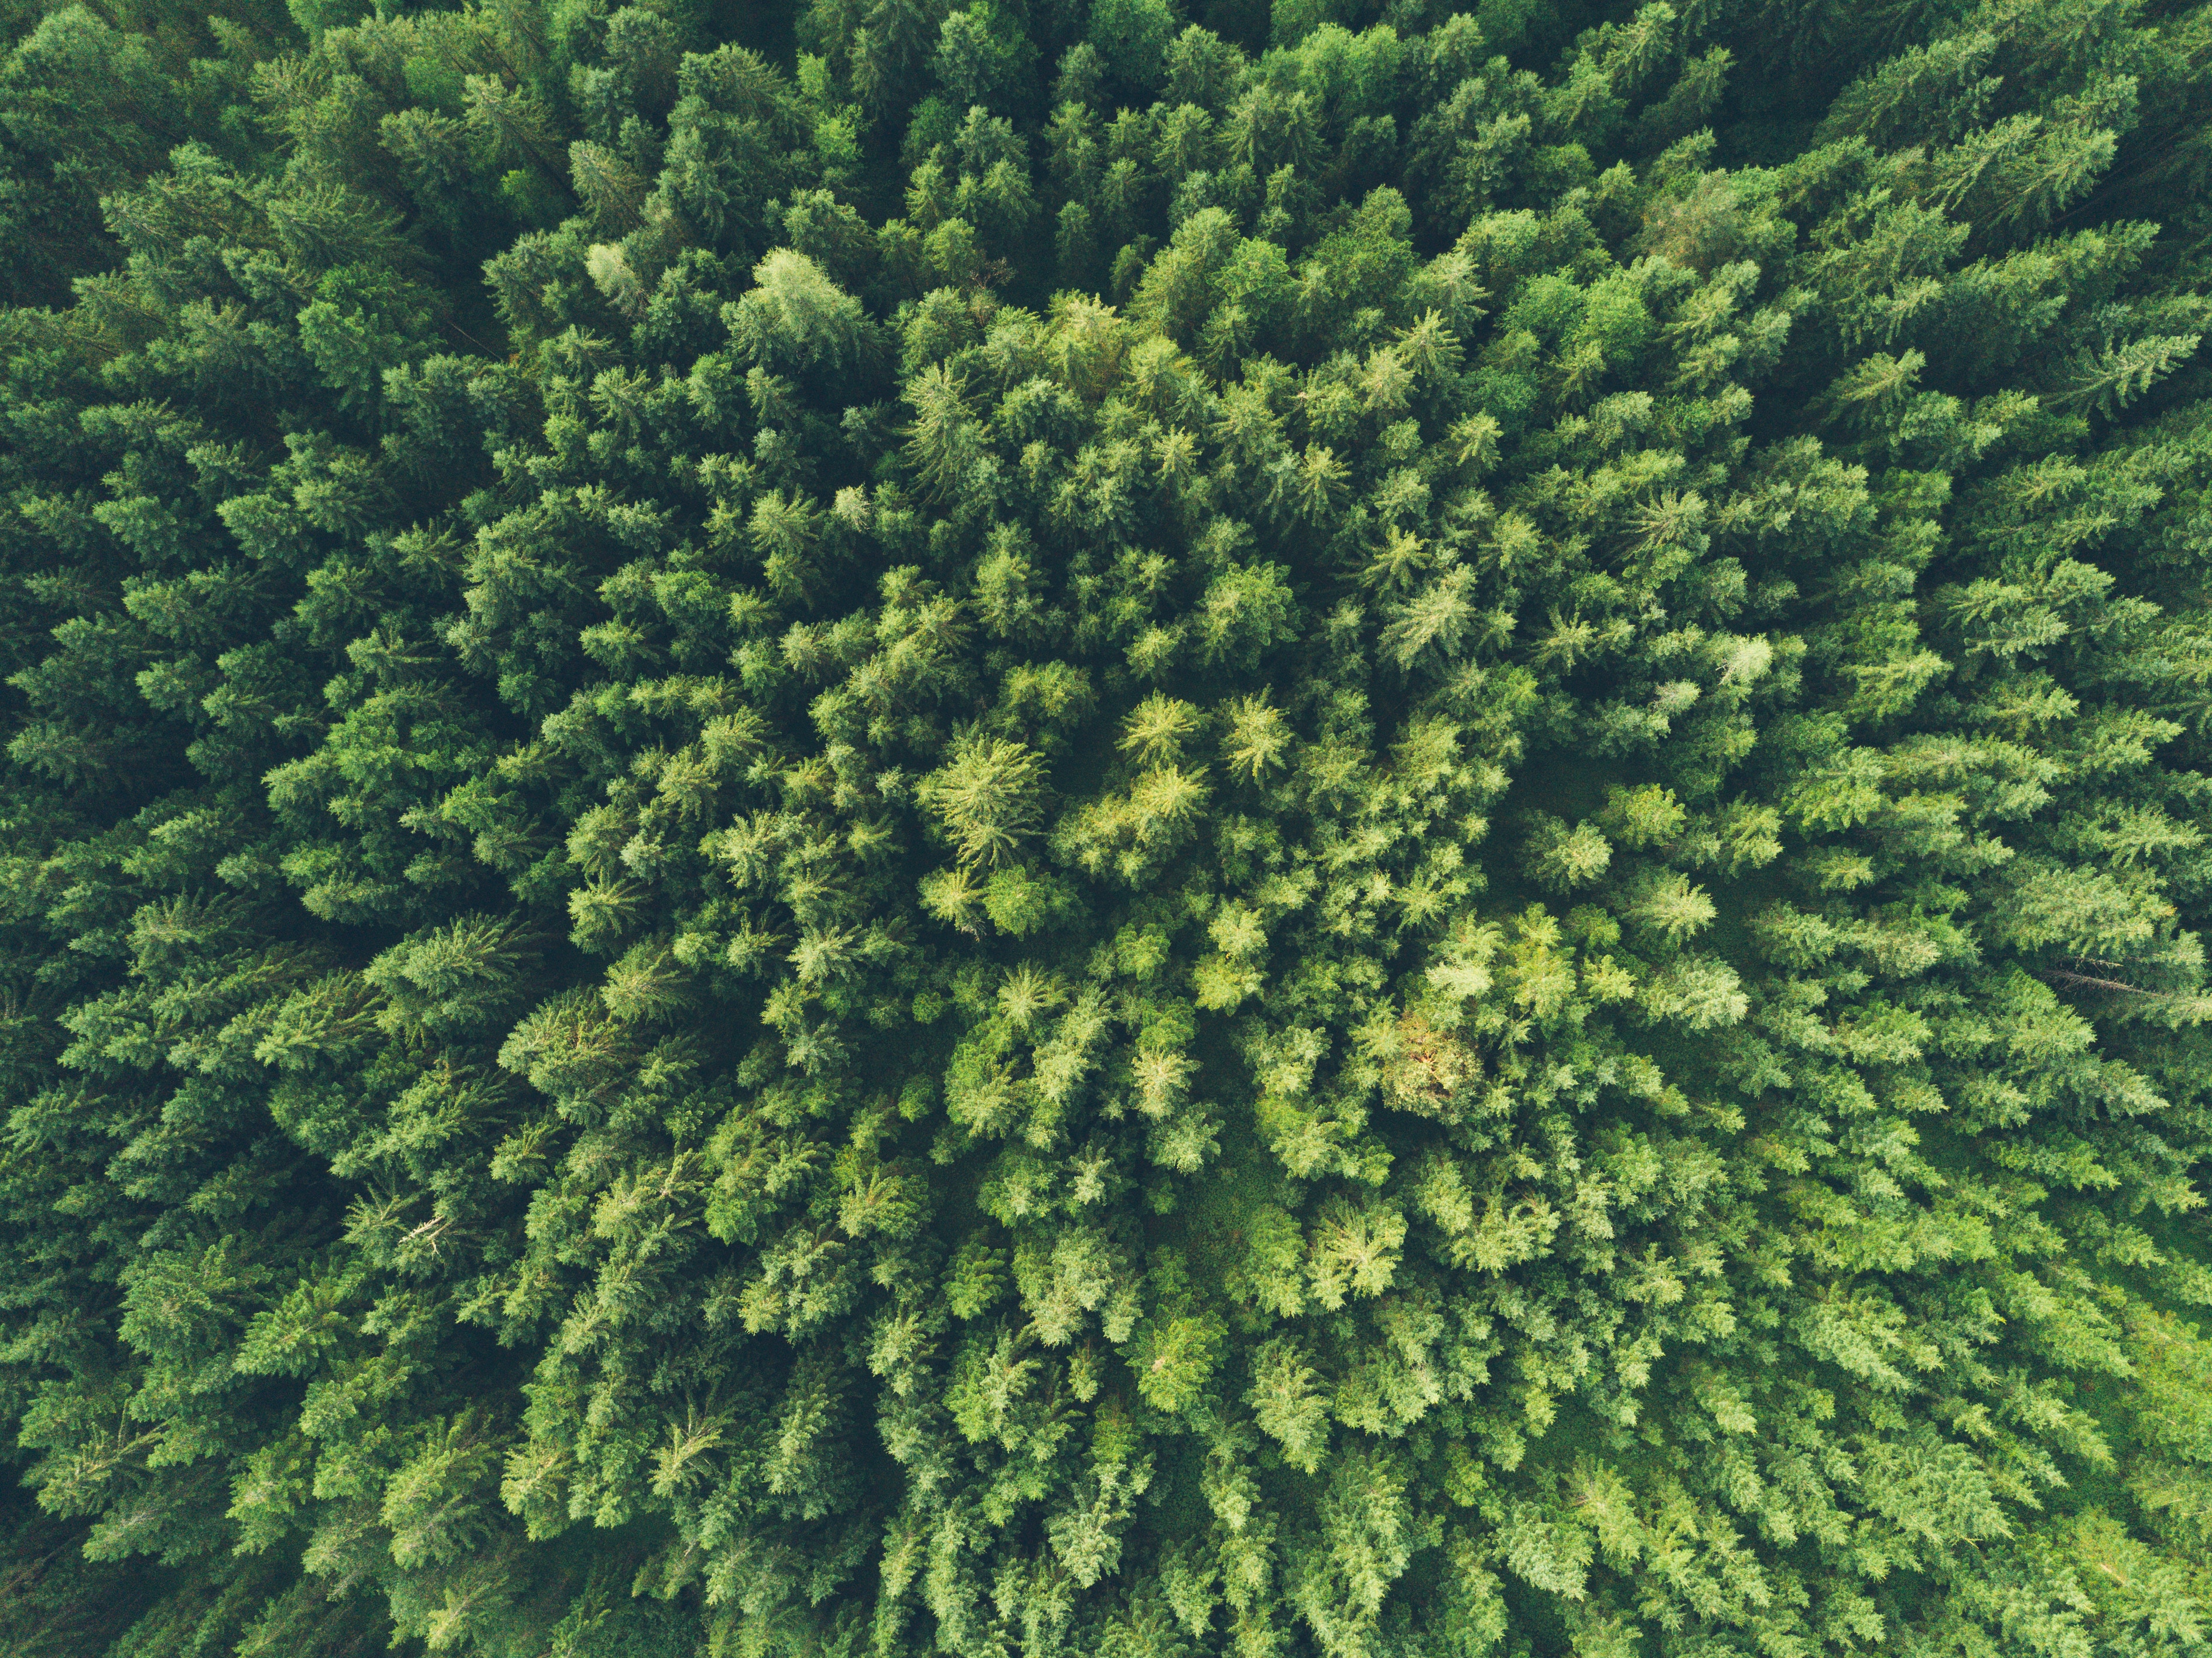 Download wallpaper 3777x2831 trees, top view, green hd background